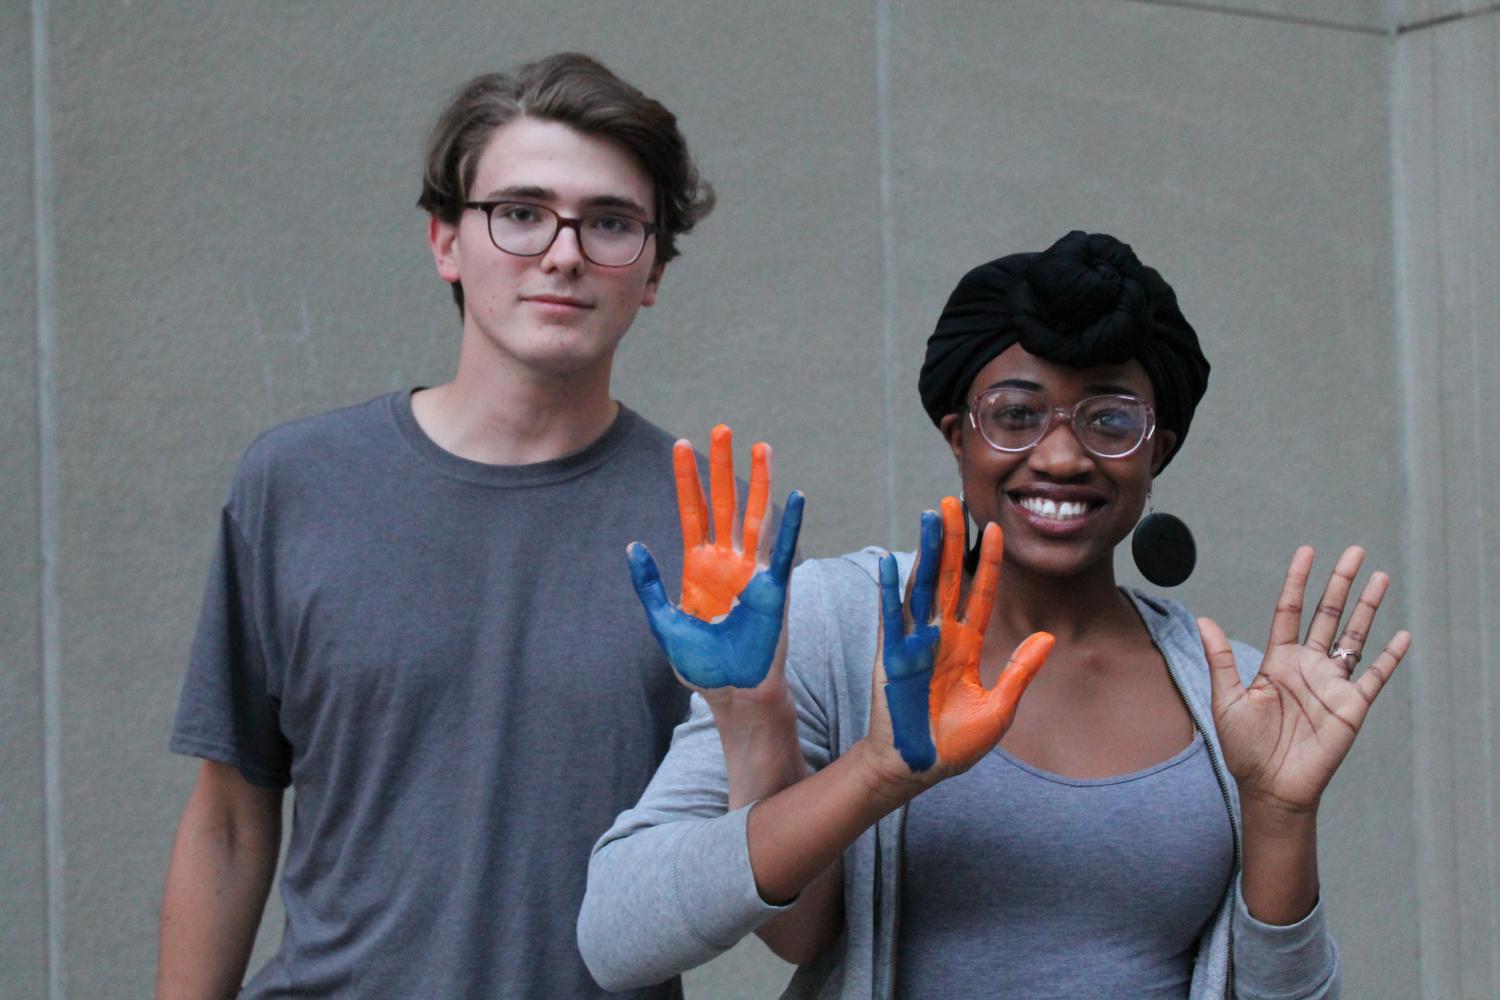 The vigil was put together in 24 hours. Before the event, students painted their hands and placed them on a banner that read NKU4UVA.